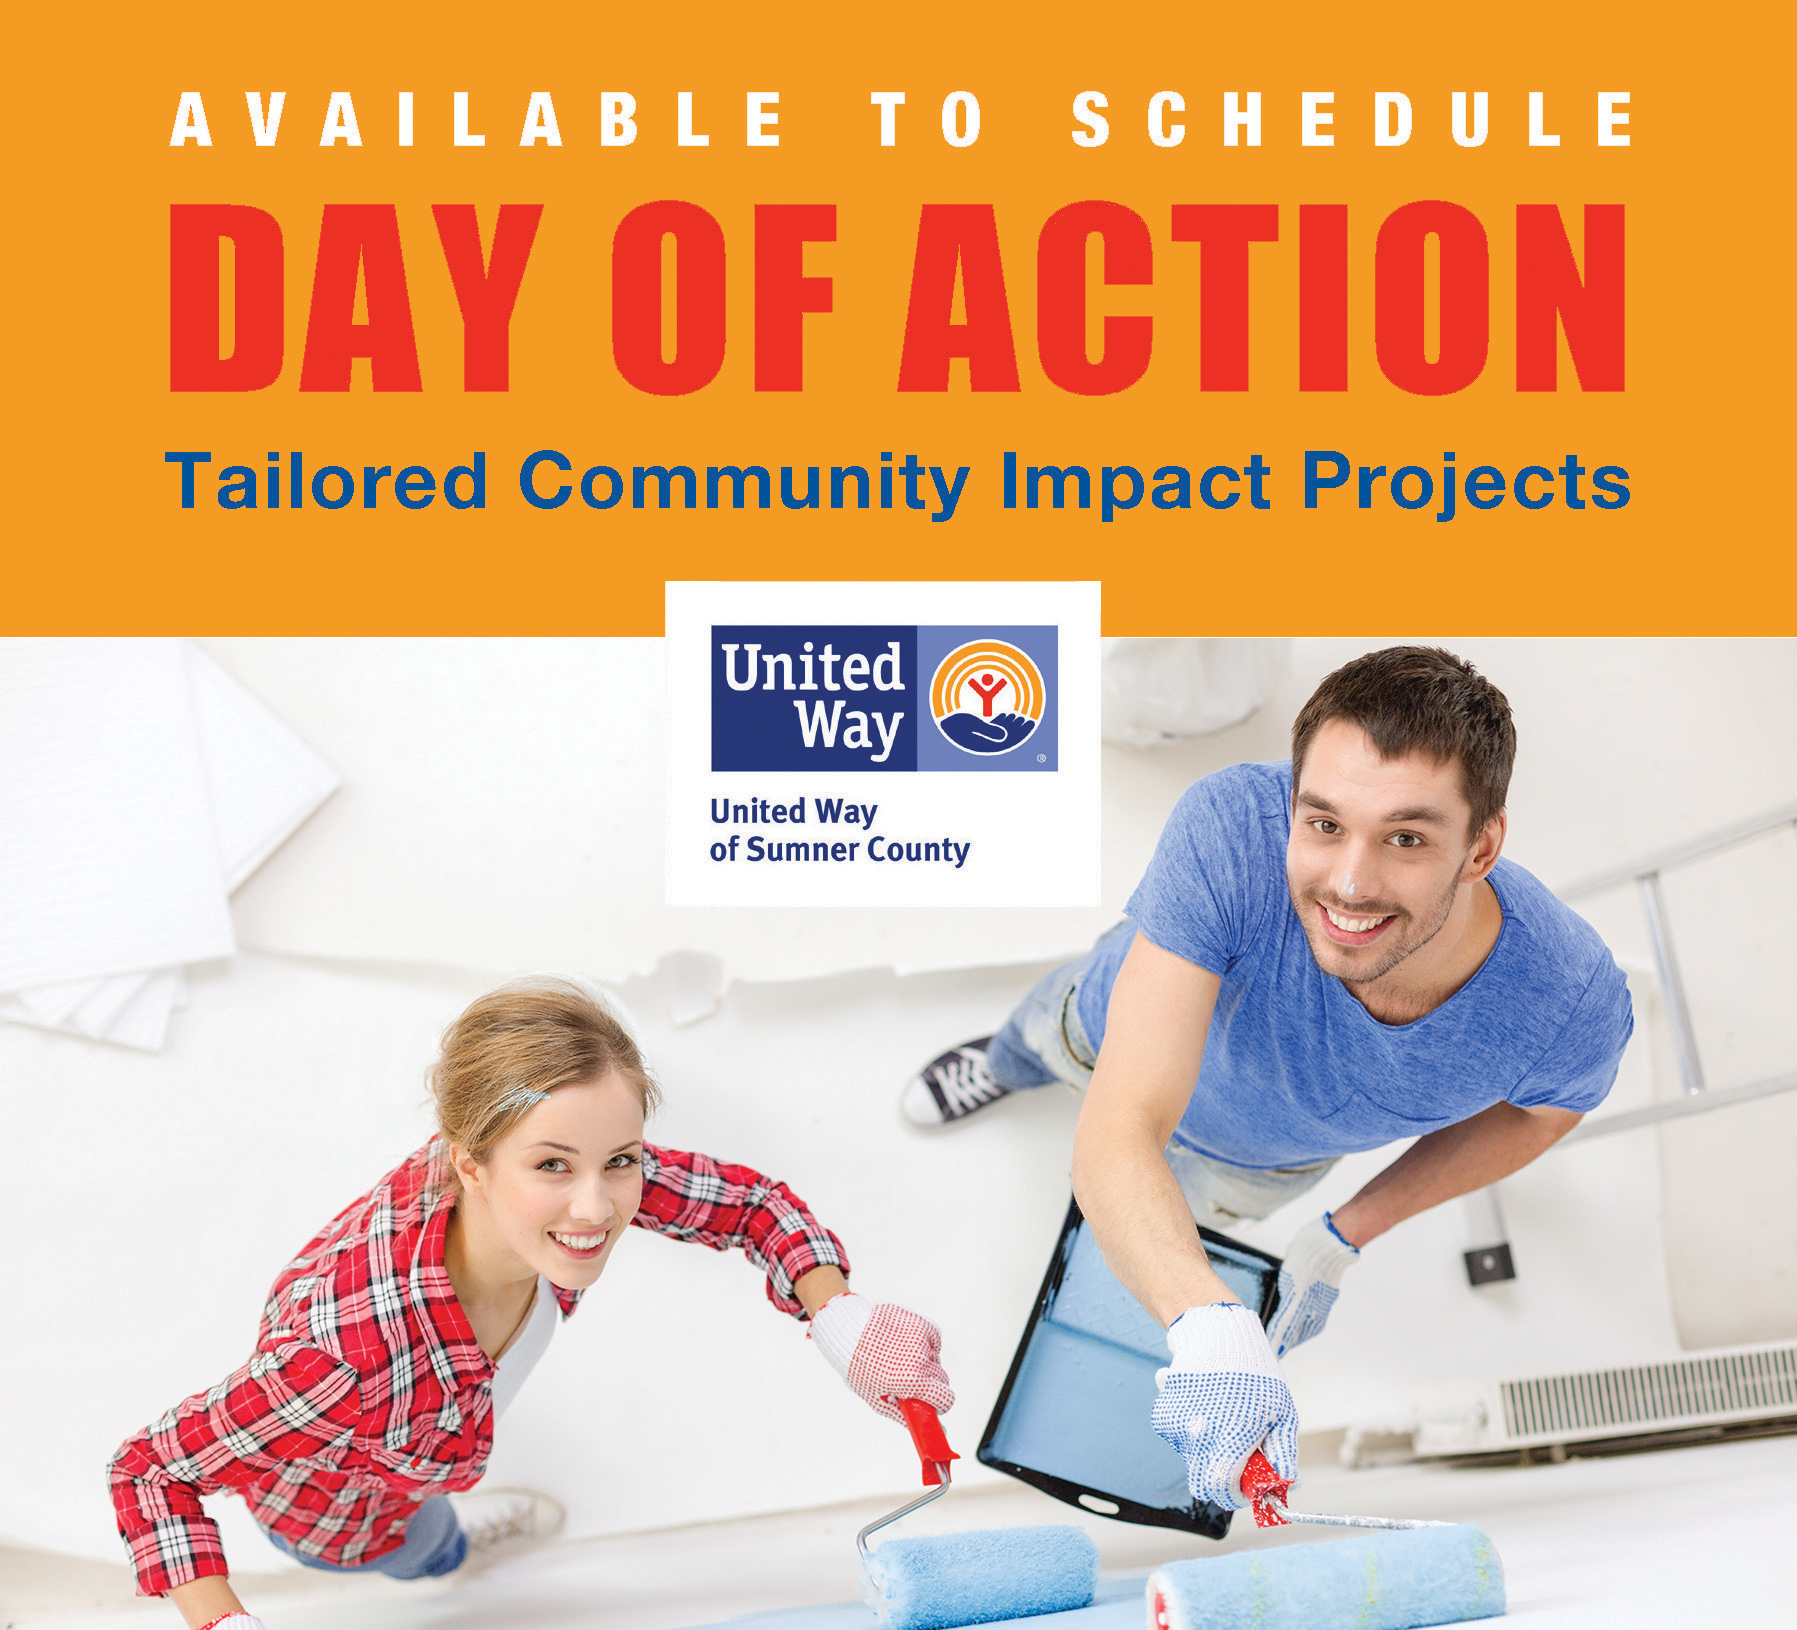 Day of Action